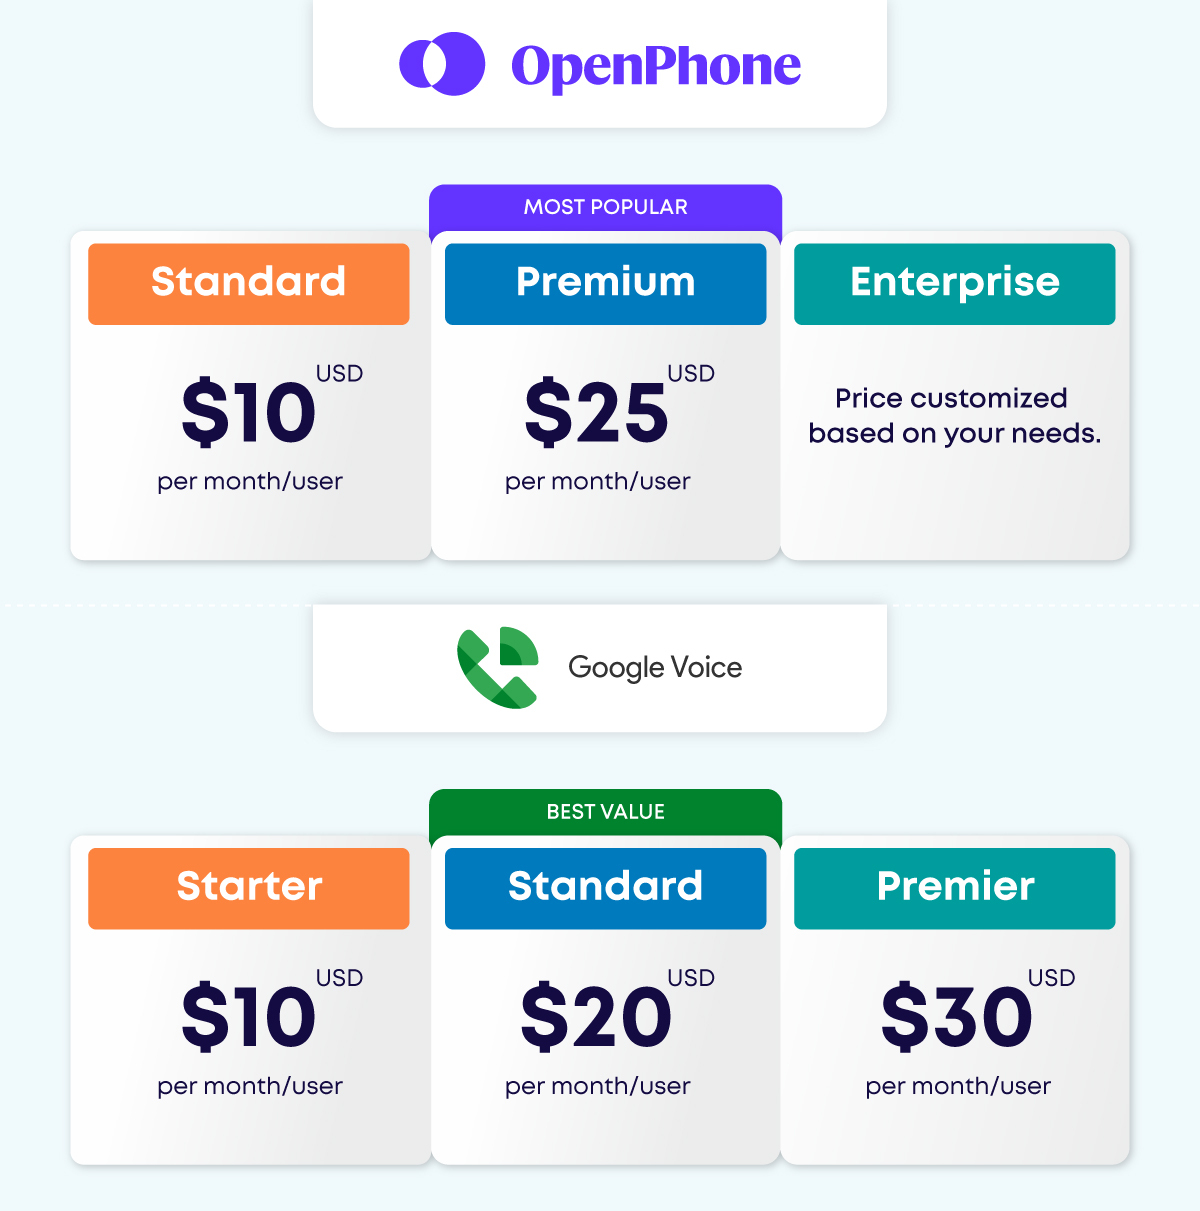 OpenPhone vs. Google Voice: Plans and pricing